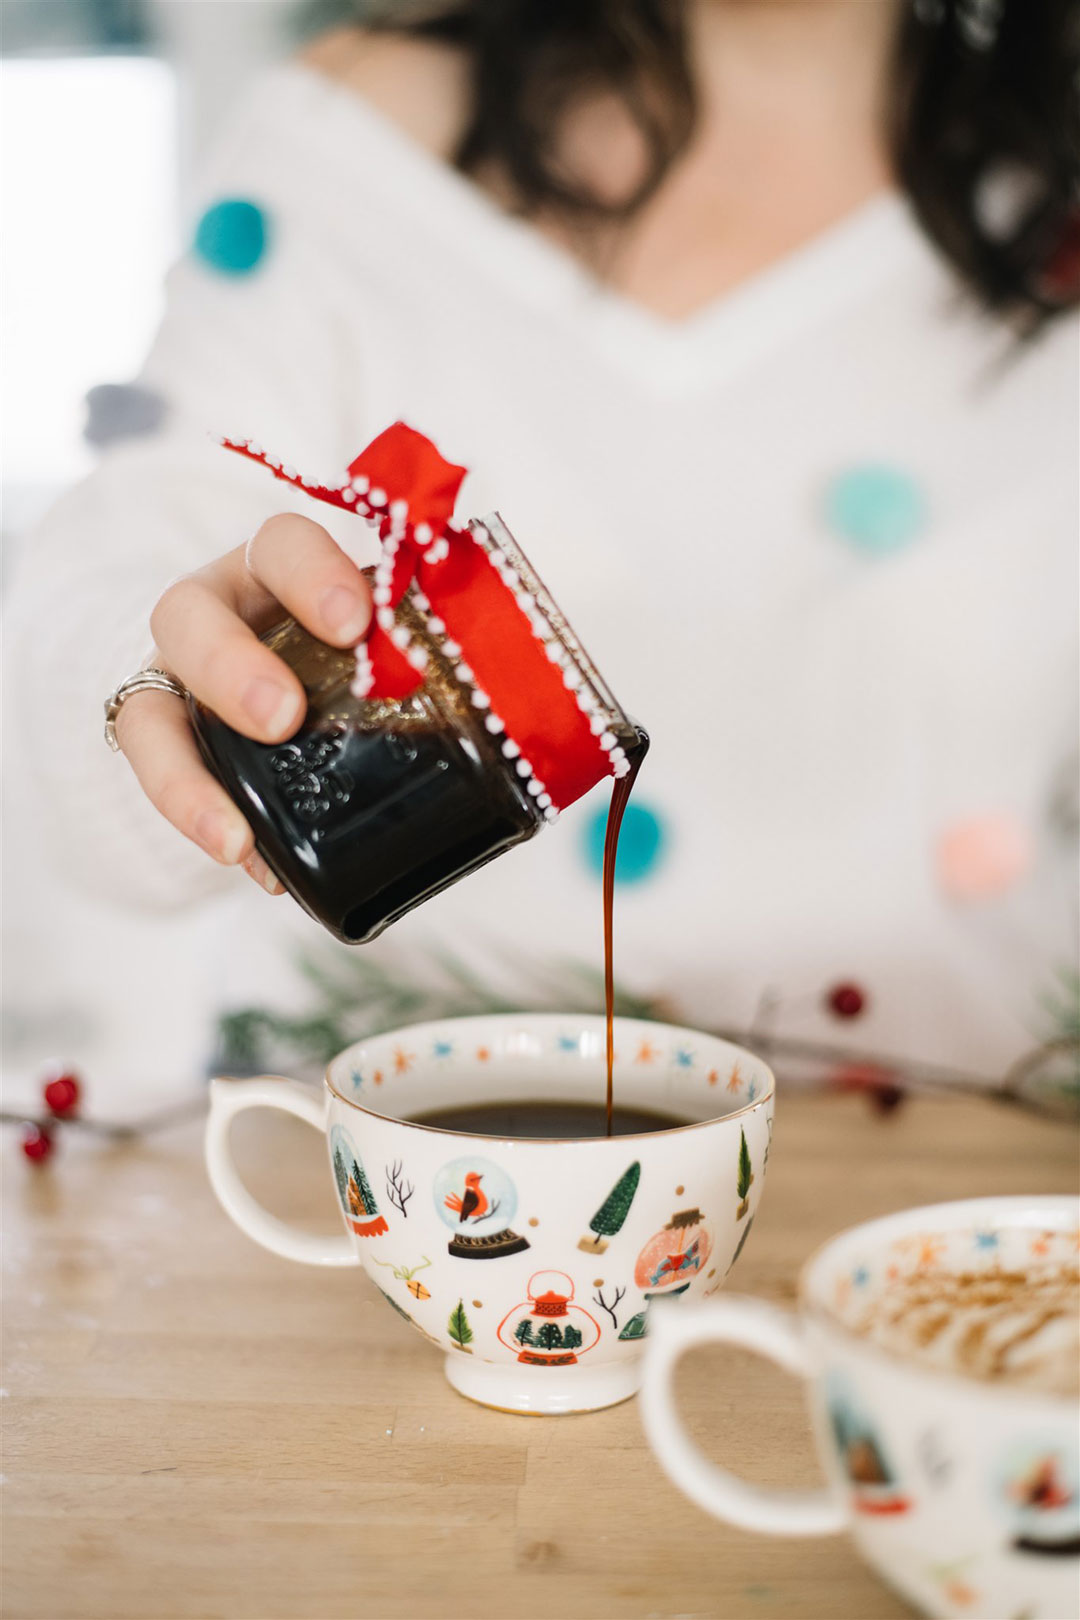 Make Gingerbread Flavored Coffee Syrup